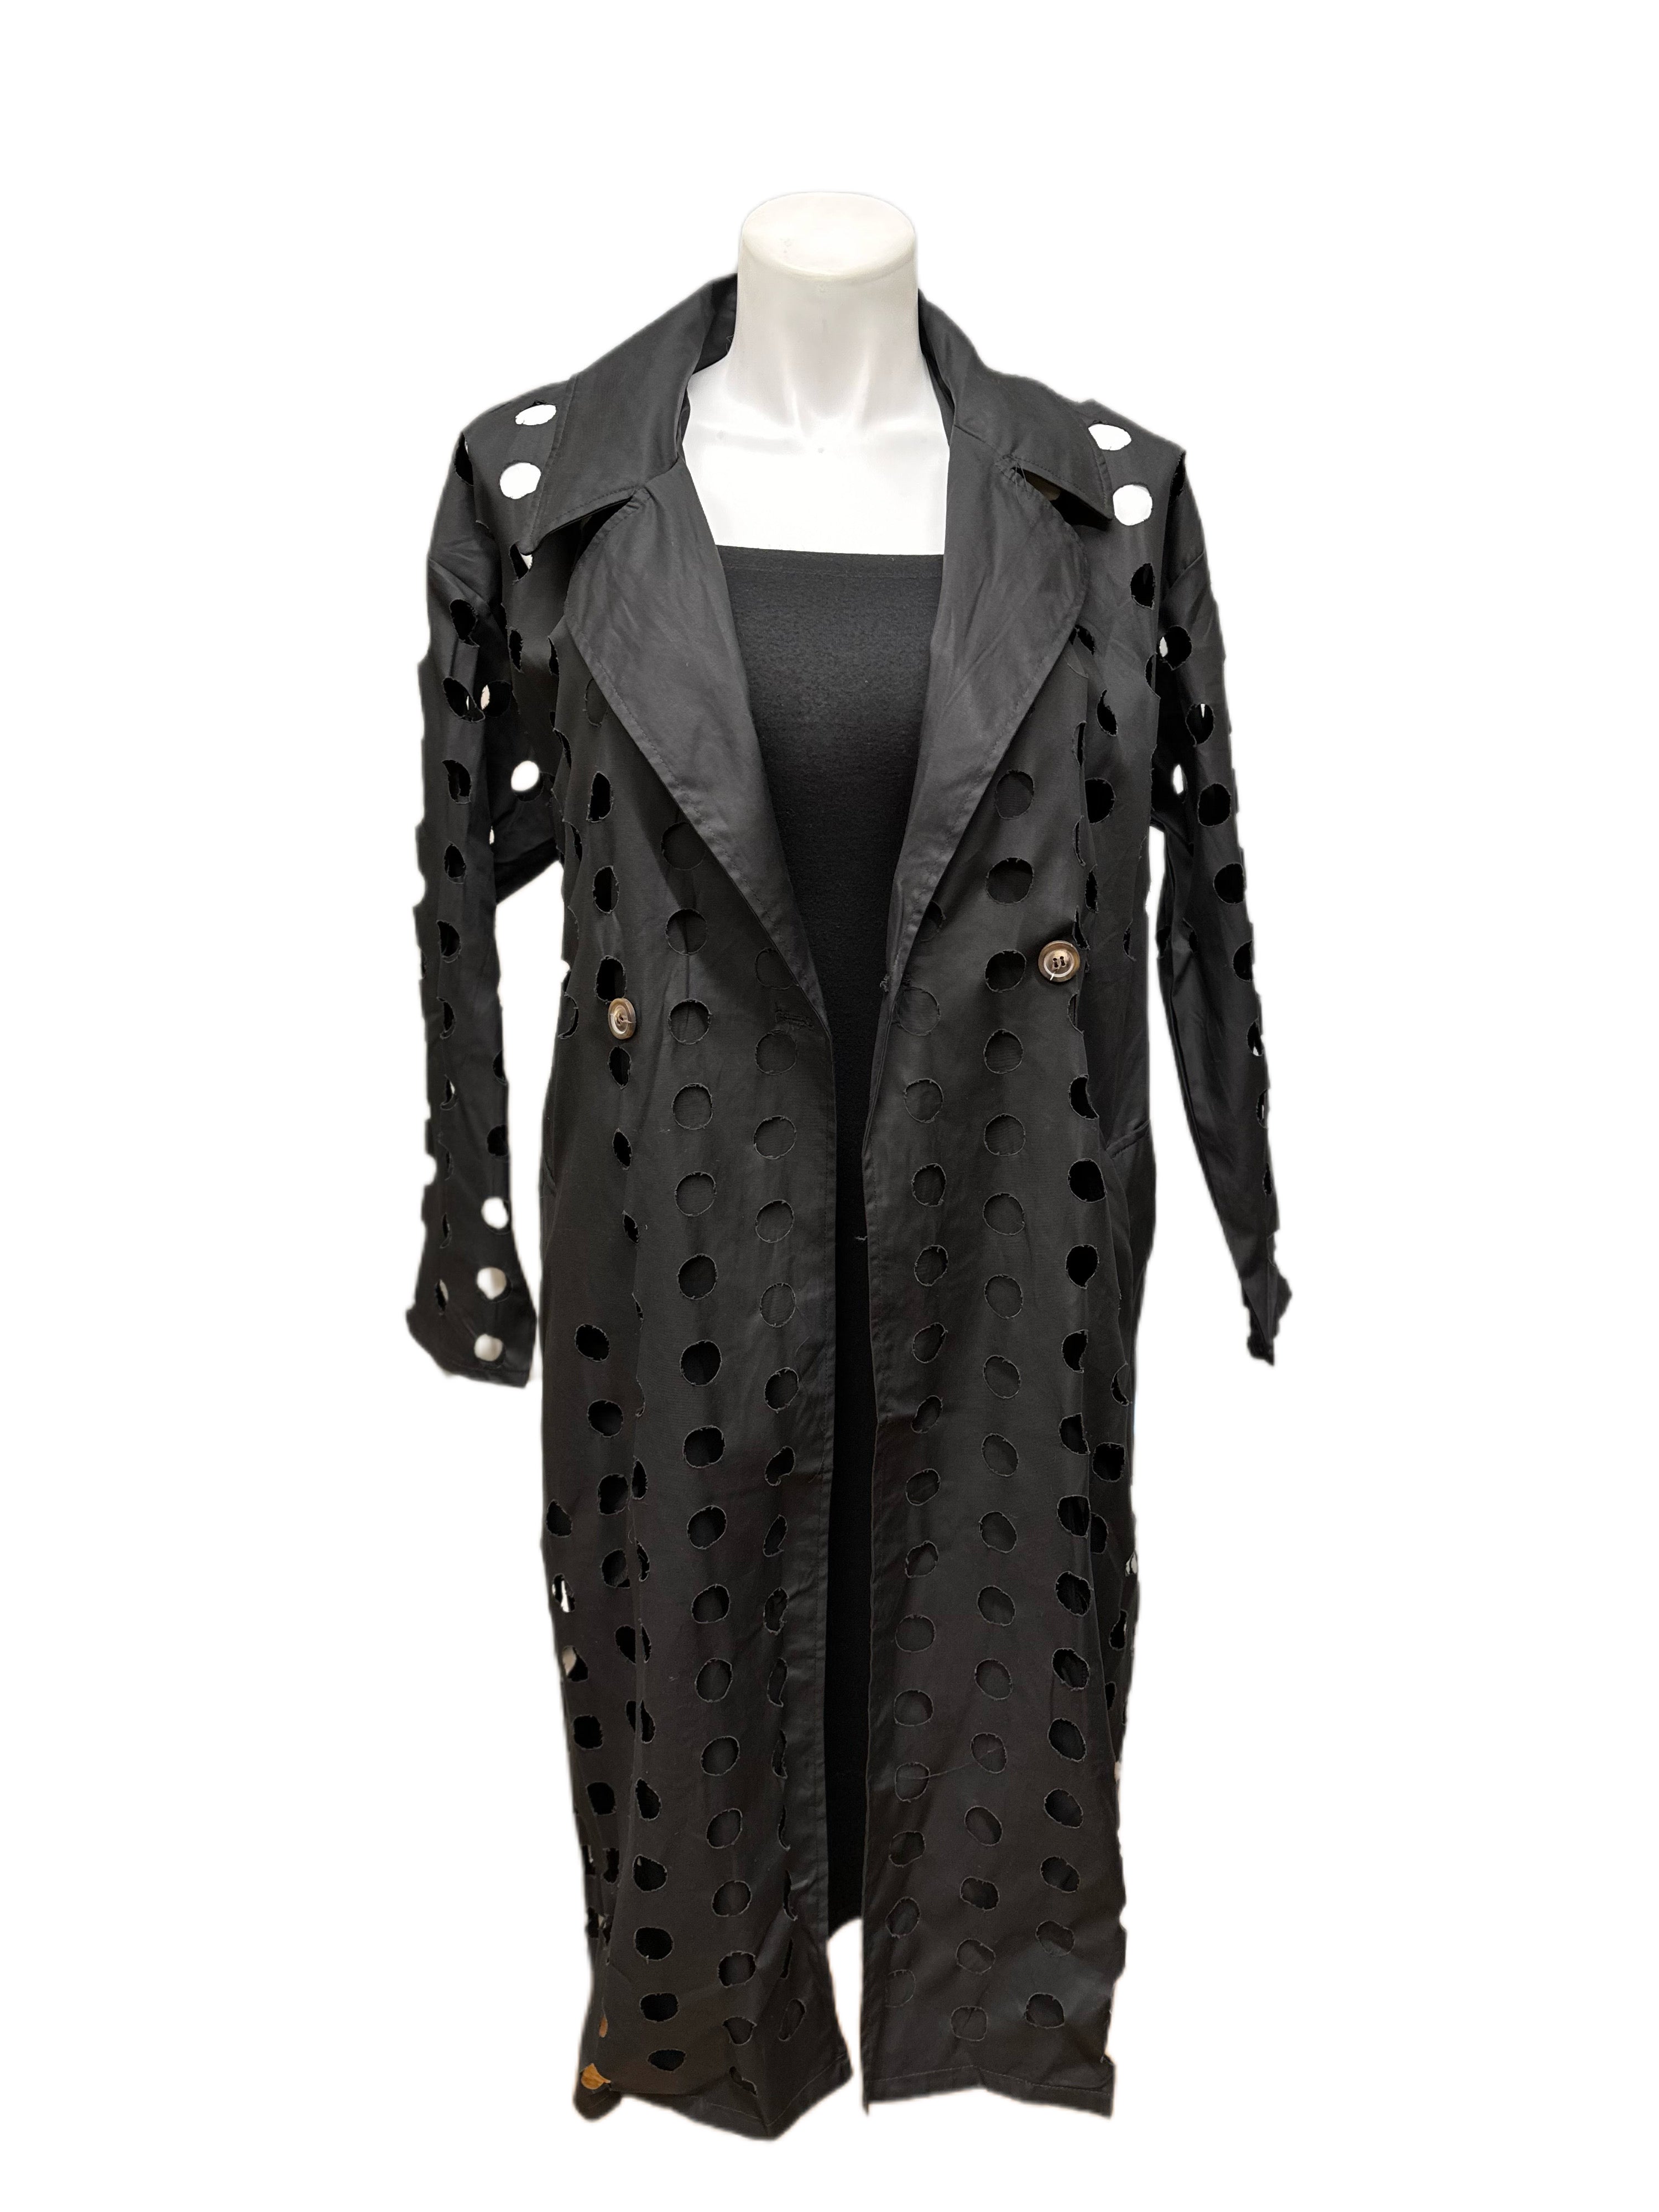 Black Cutout Belted Specialty Trench Coat